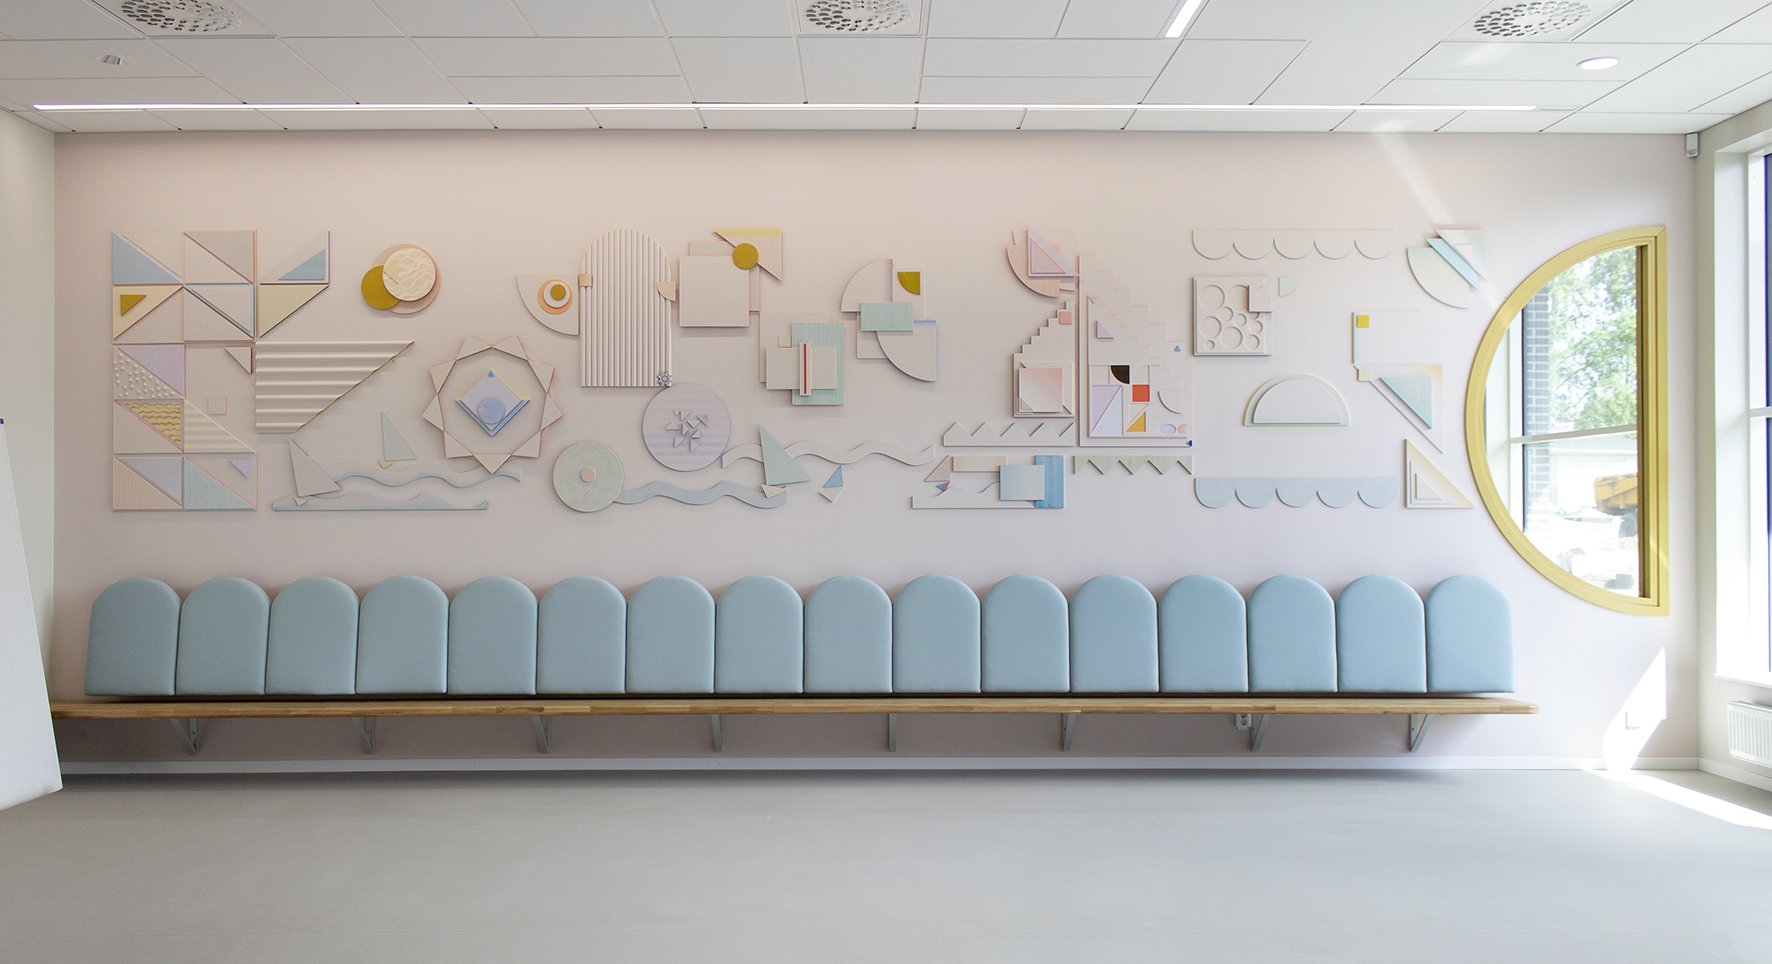 Geometric Stories_Fyllinge School_2023_painted mdf and wood on 7m long wall_Public commission_AlexandraSeverinsson_1MB.jpg